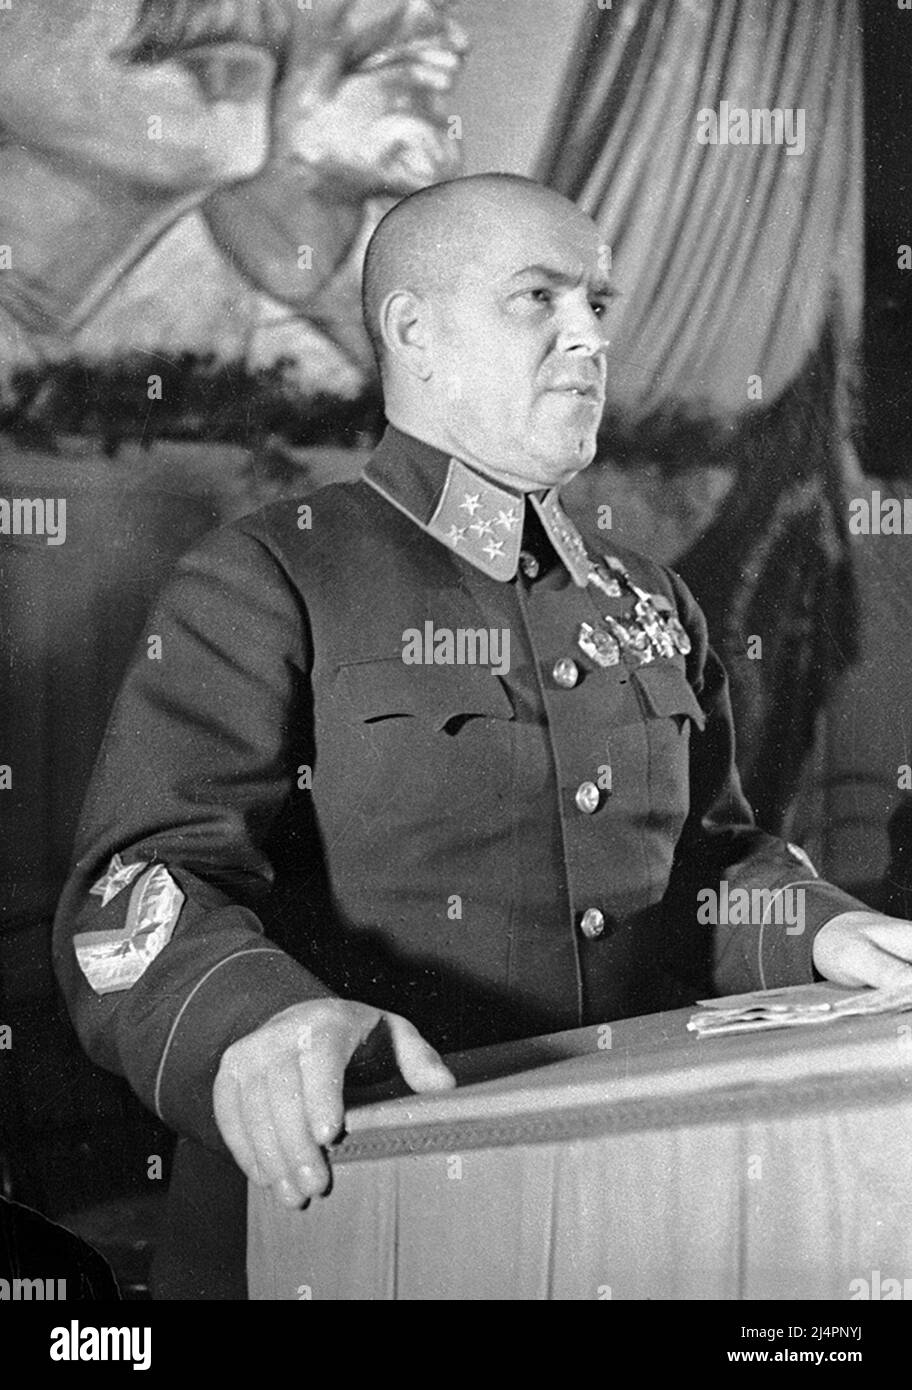 One of WW2's most formidable commanders, Georgy Zhukov from the Red Army Stock Photo